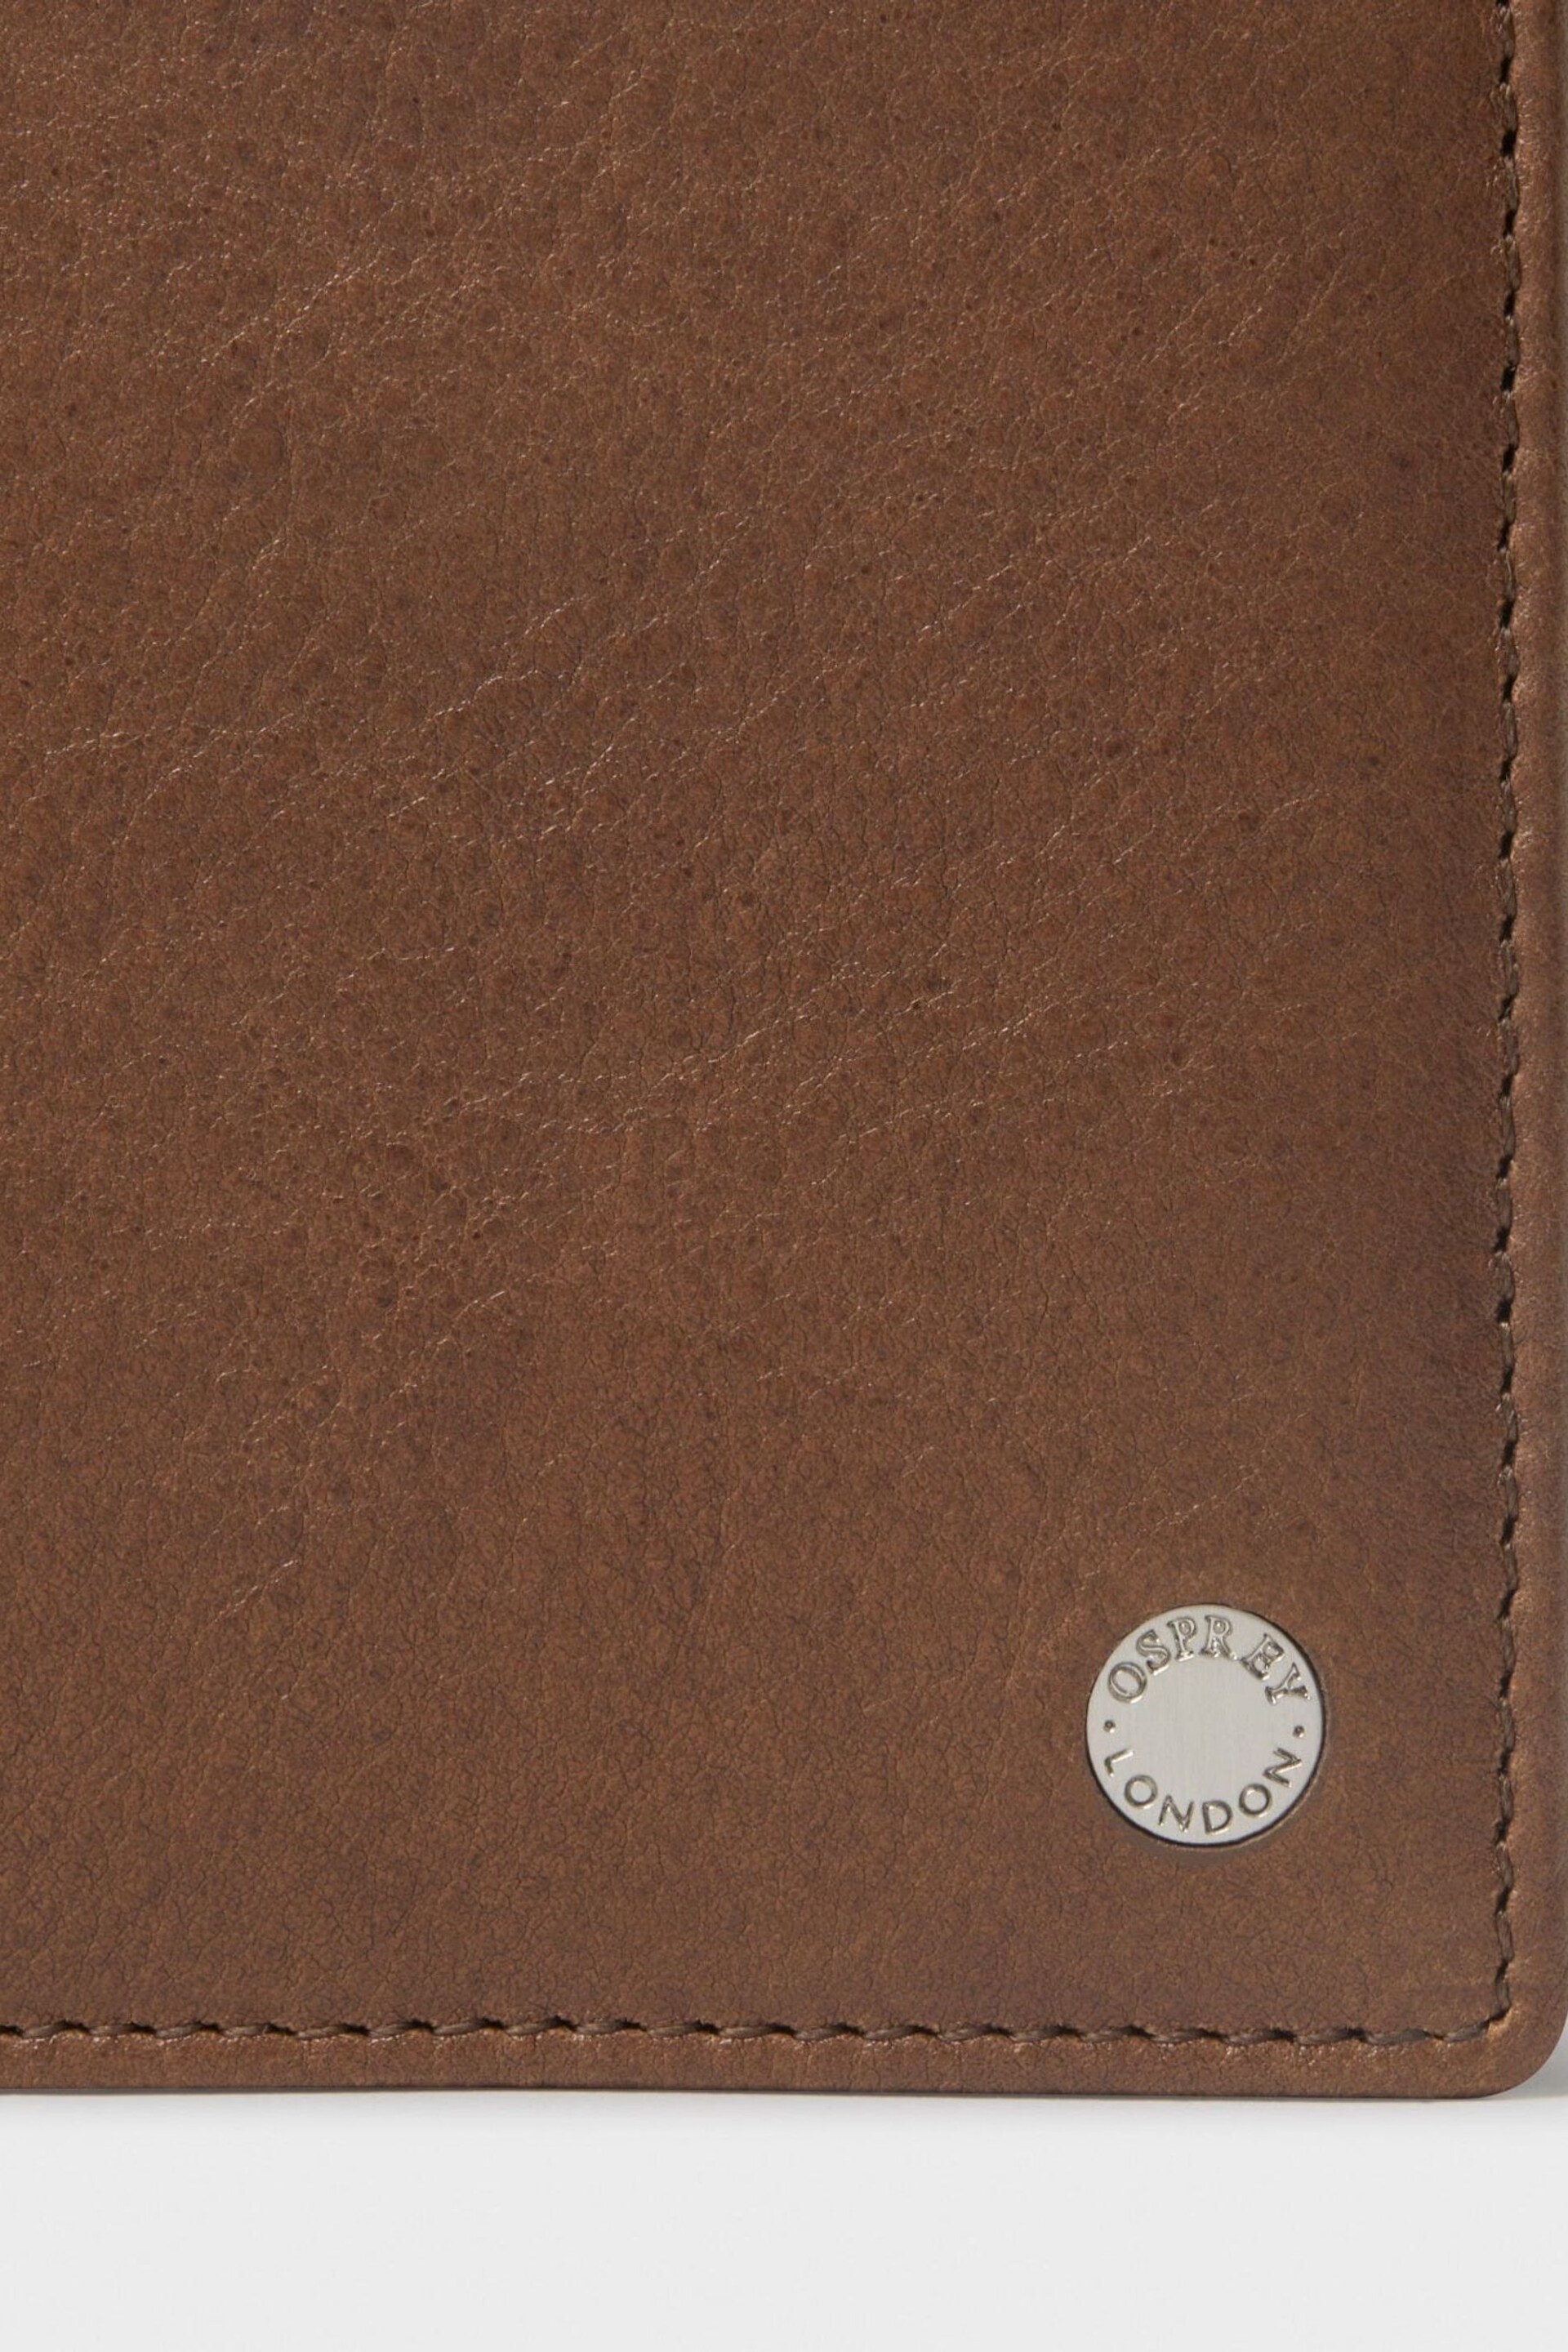 Osprey London Large Business Class E/W Coin Wallet - Image 5 of 5